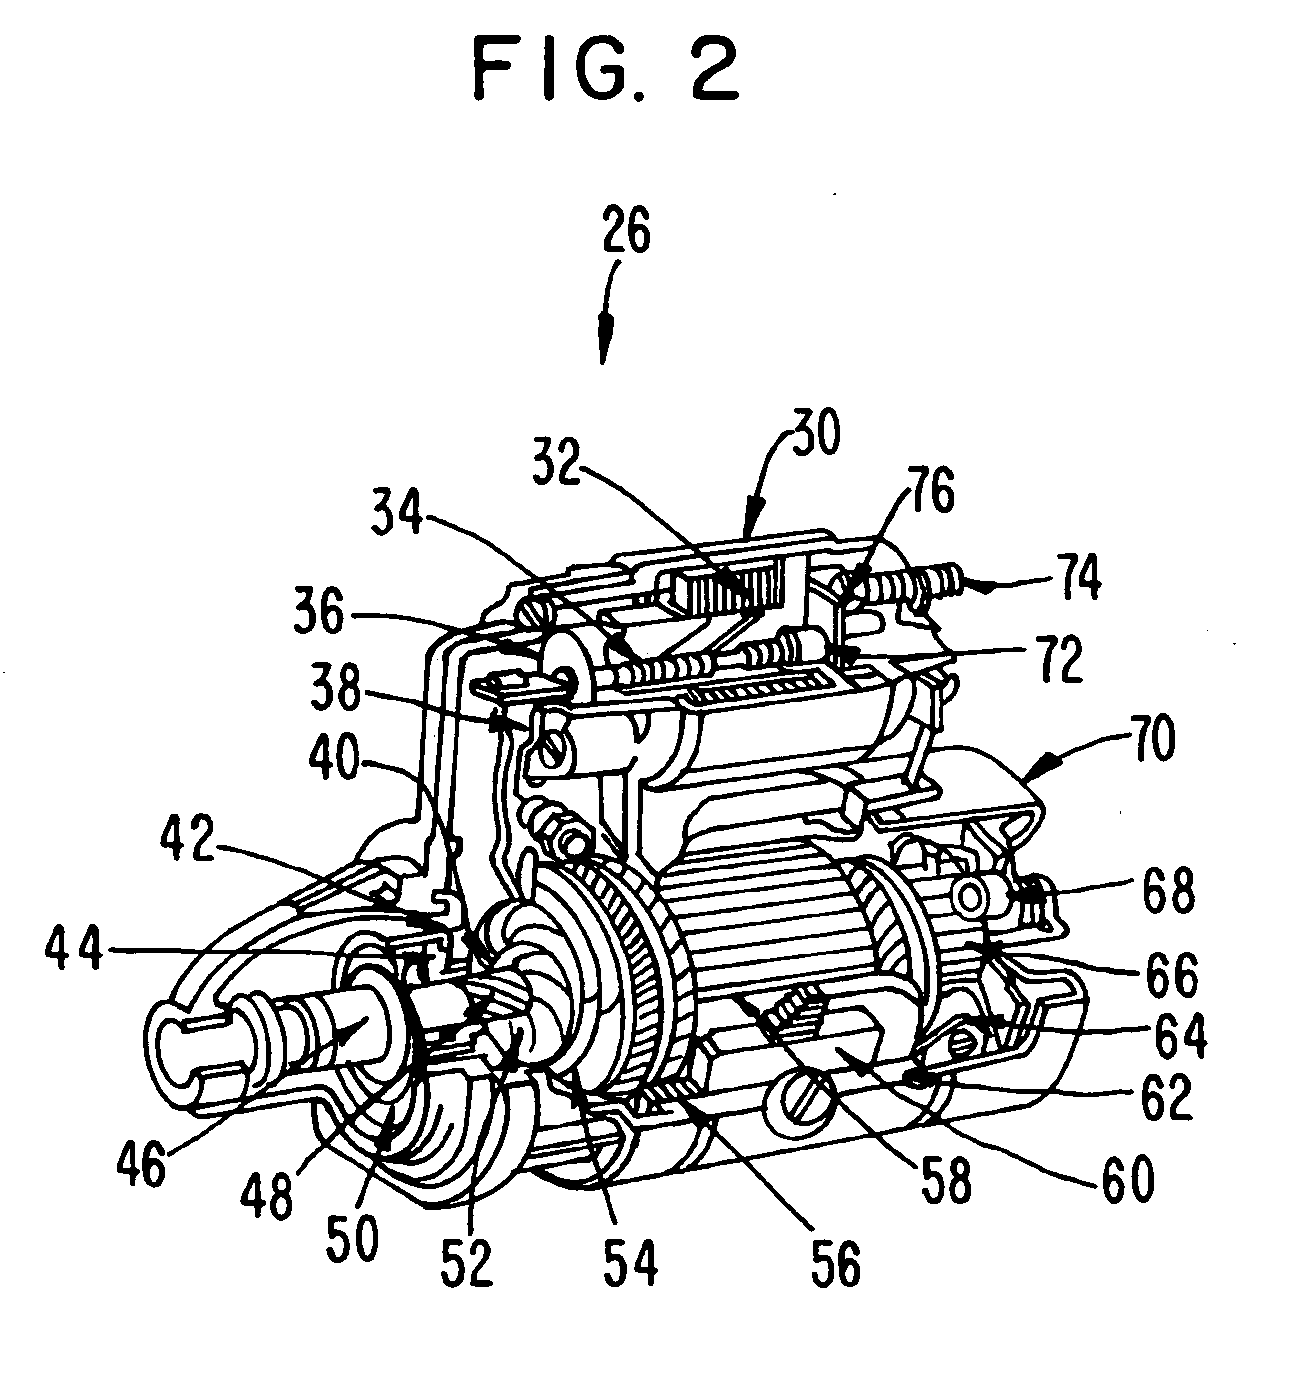 Testing apparatus and method for vehicle starting and charging system